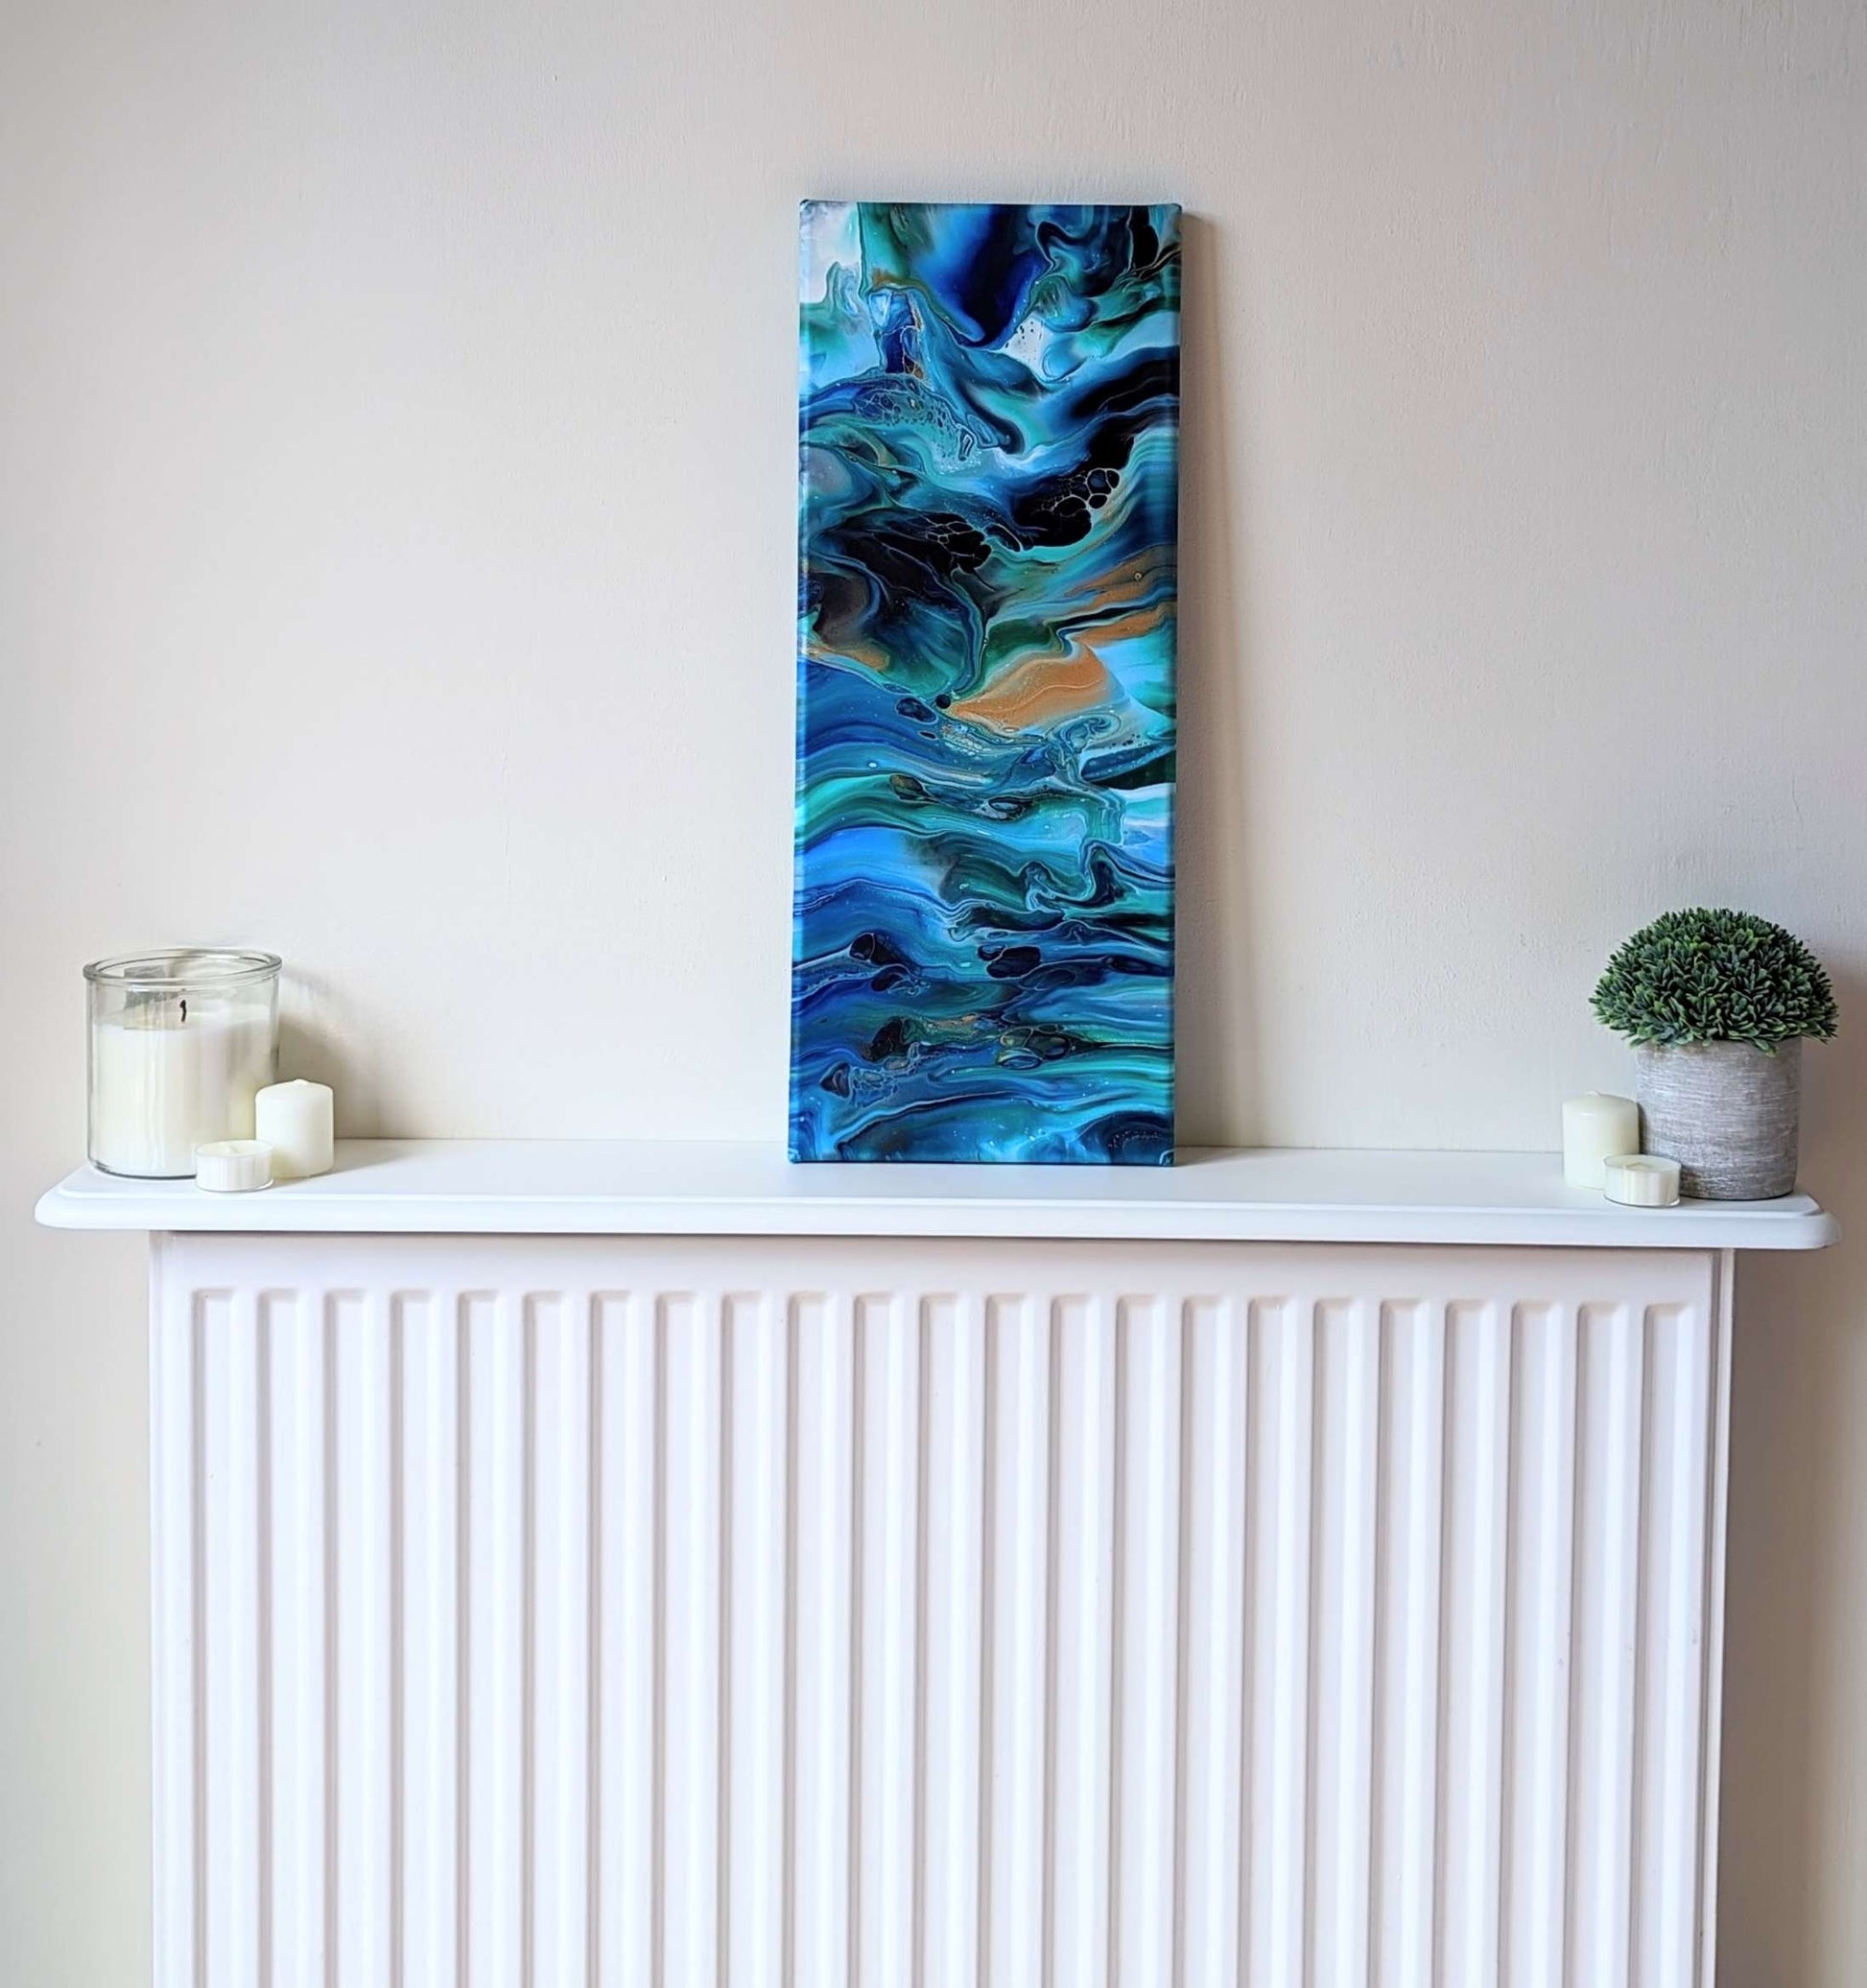 Canvas on shelf – frontal view of original abstract painting made with high contrast and gold professional grade acrylic paint.